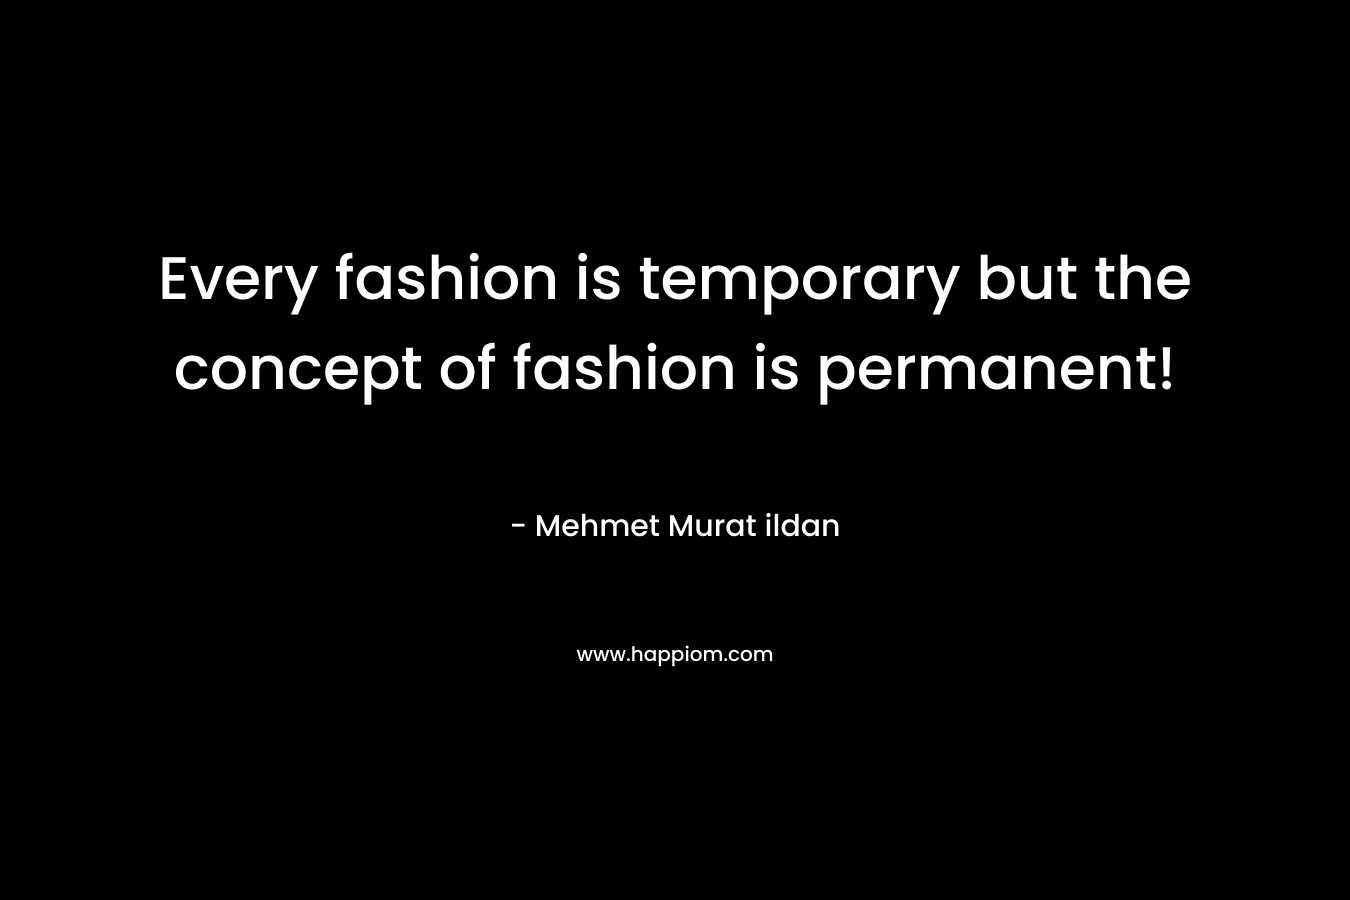 Every fashion is temporary but the concept of fashion is permanent! – Mehmet Murat ildan